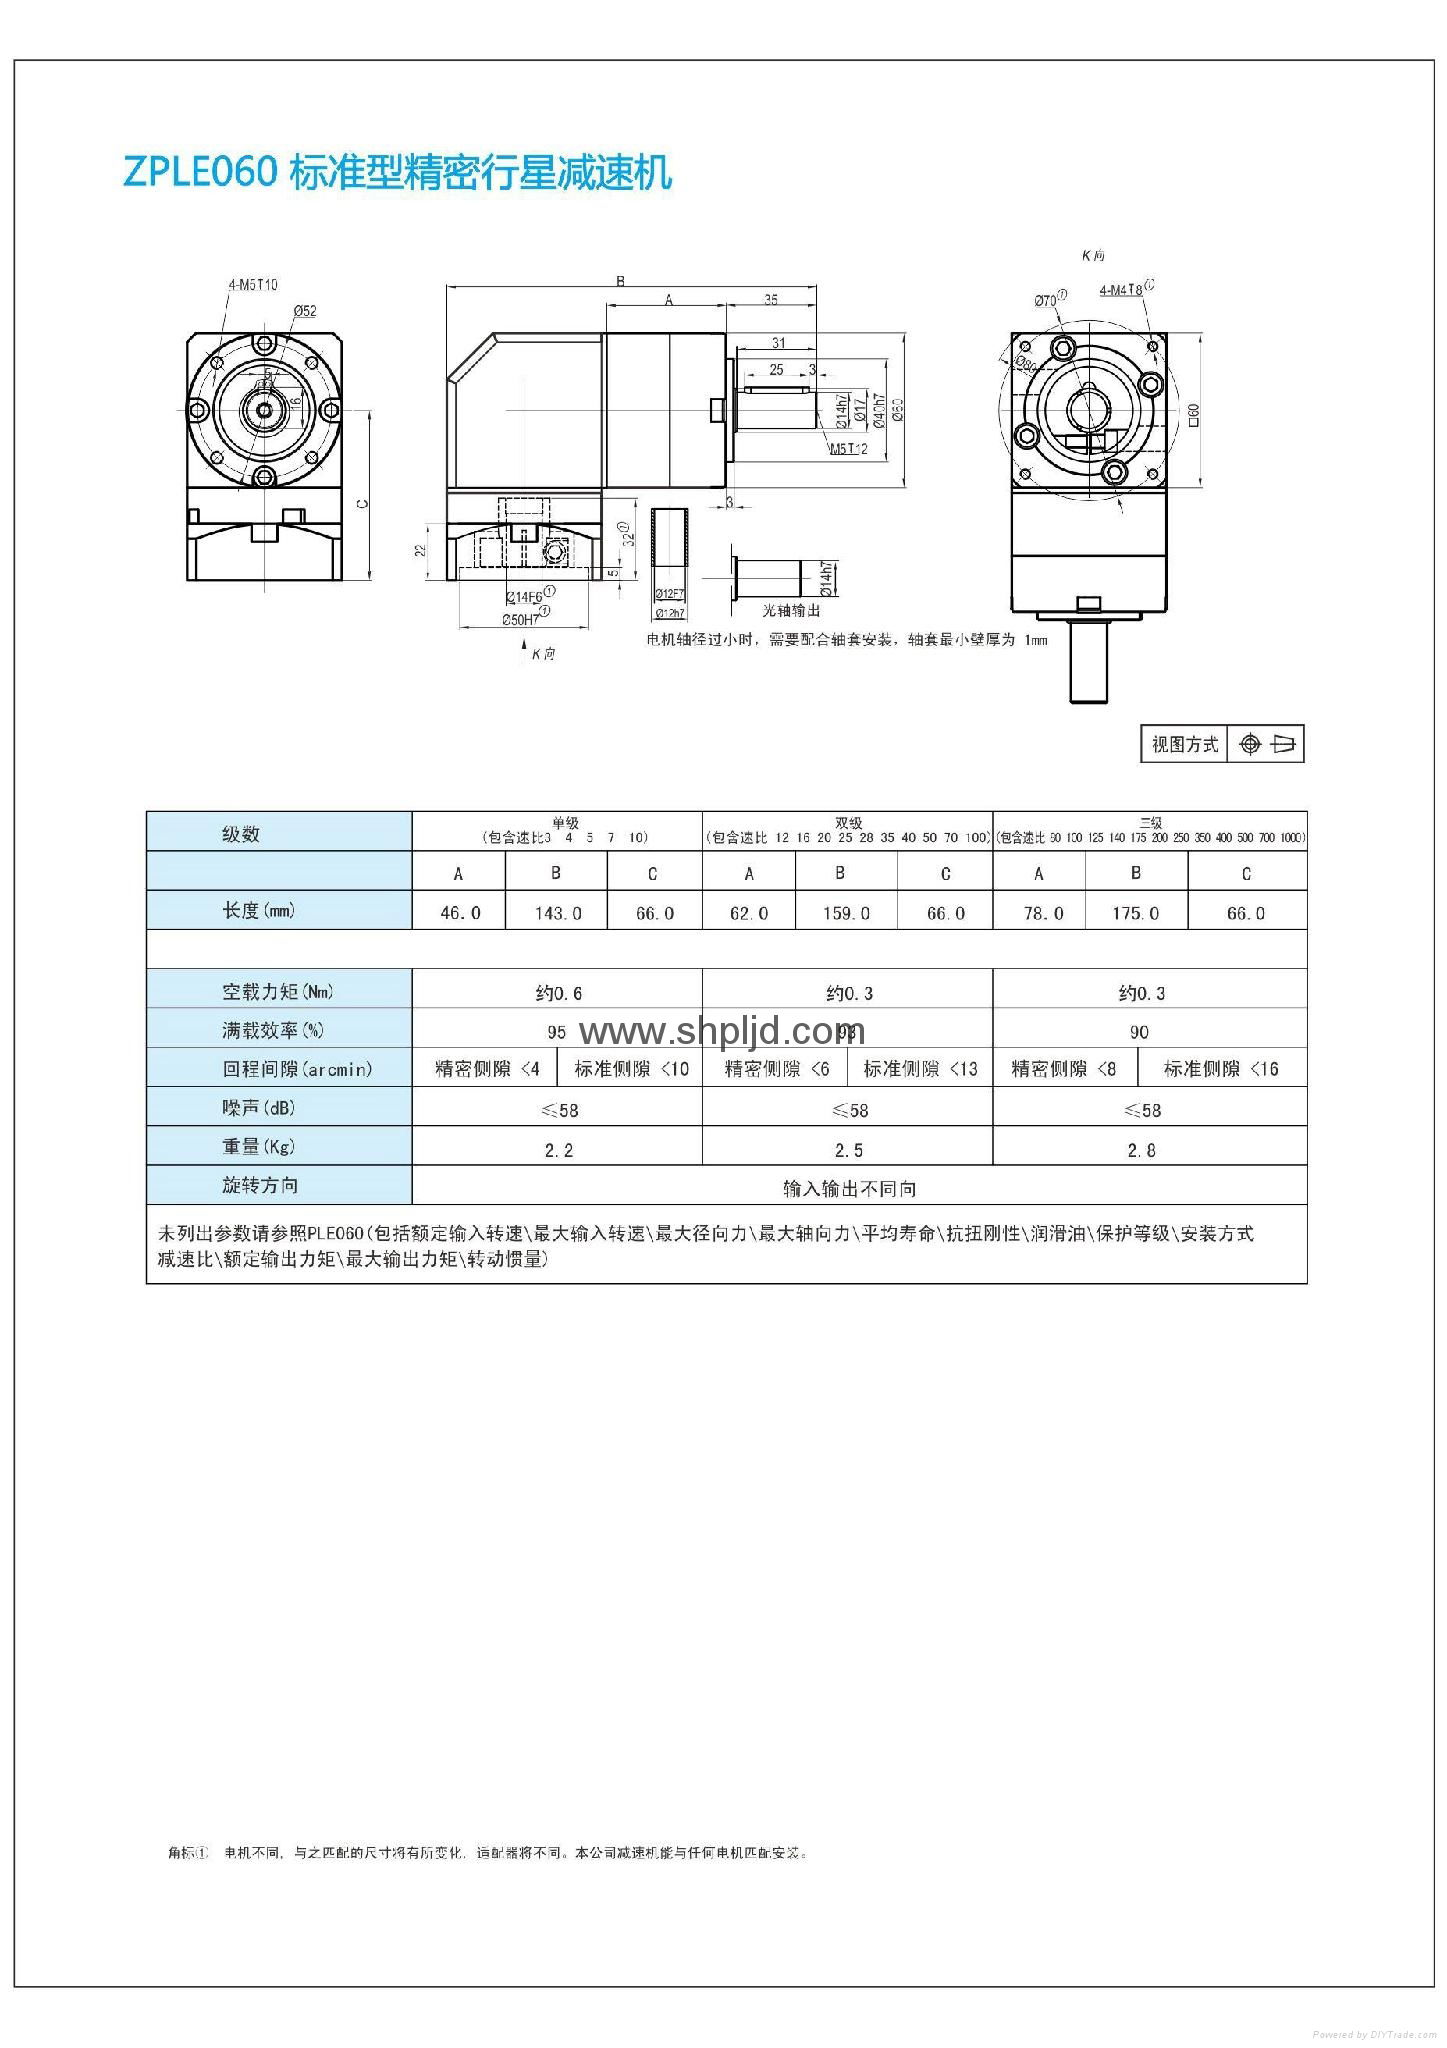 ZPLE right angle precsion planetary gearbox for servo stepper motor 3